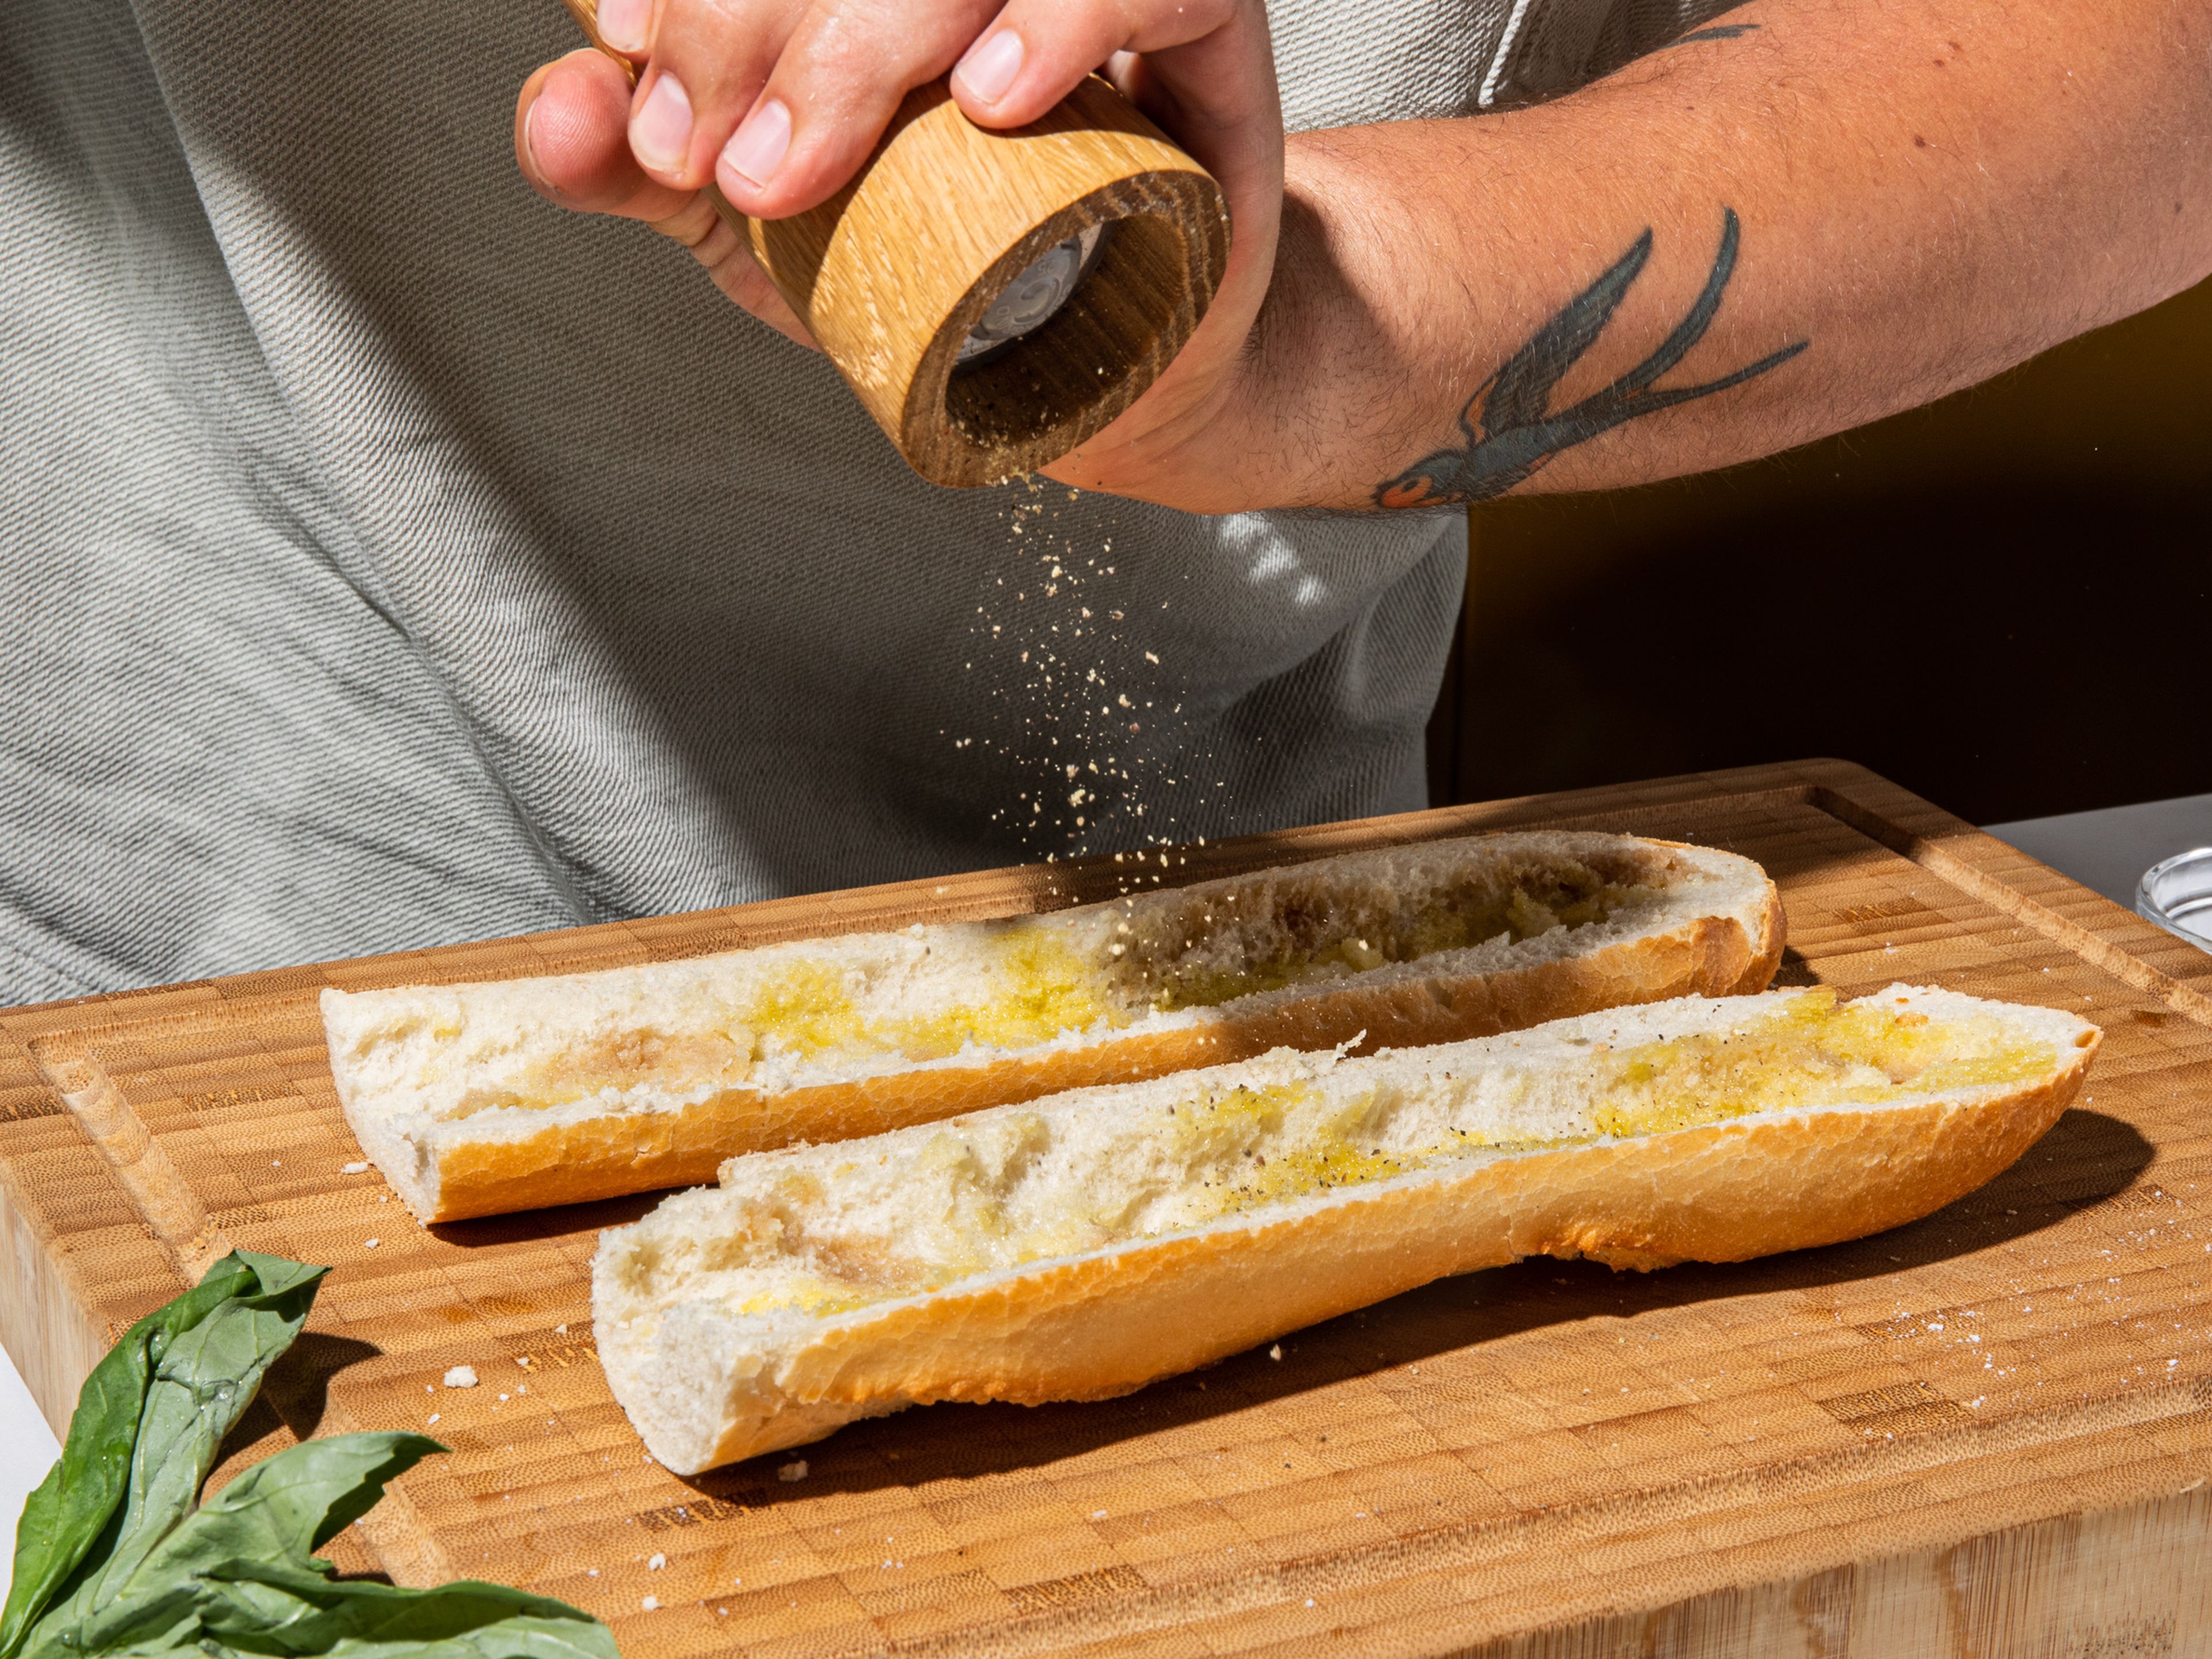 Slice the baguette lengthwise and remove some of the soft crumb from the top and bottom of the bread to make room for the fillings. Drizzle with olive oil and sprinkle with vinegar, salt and pepper.